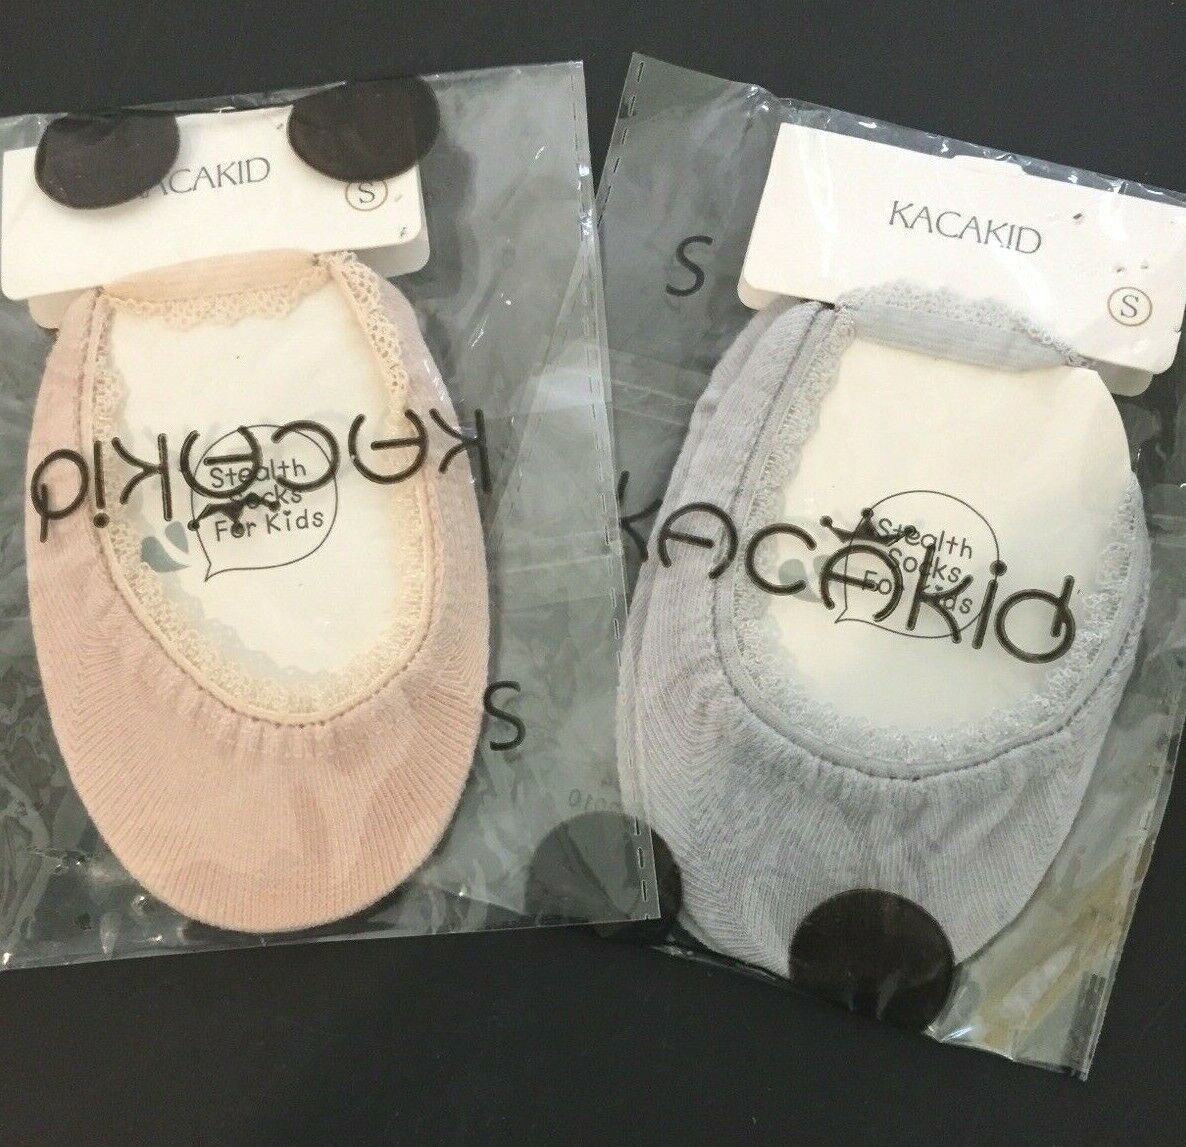 Kacakid Stealth Socks For Kids - Pink / Gray- Two Pair Size S Nwt!